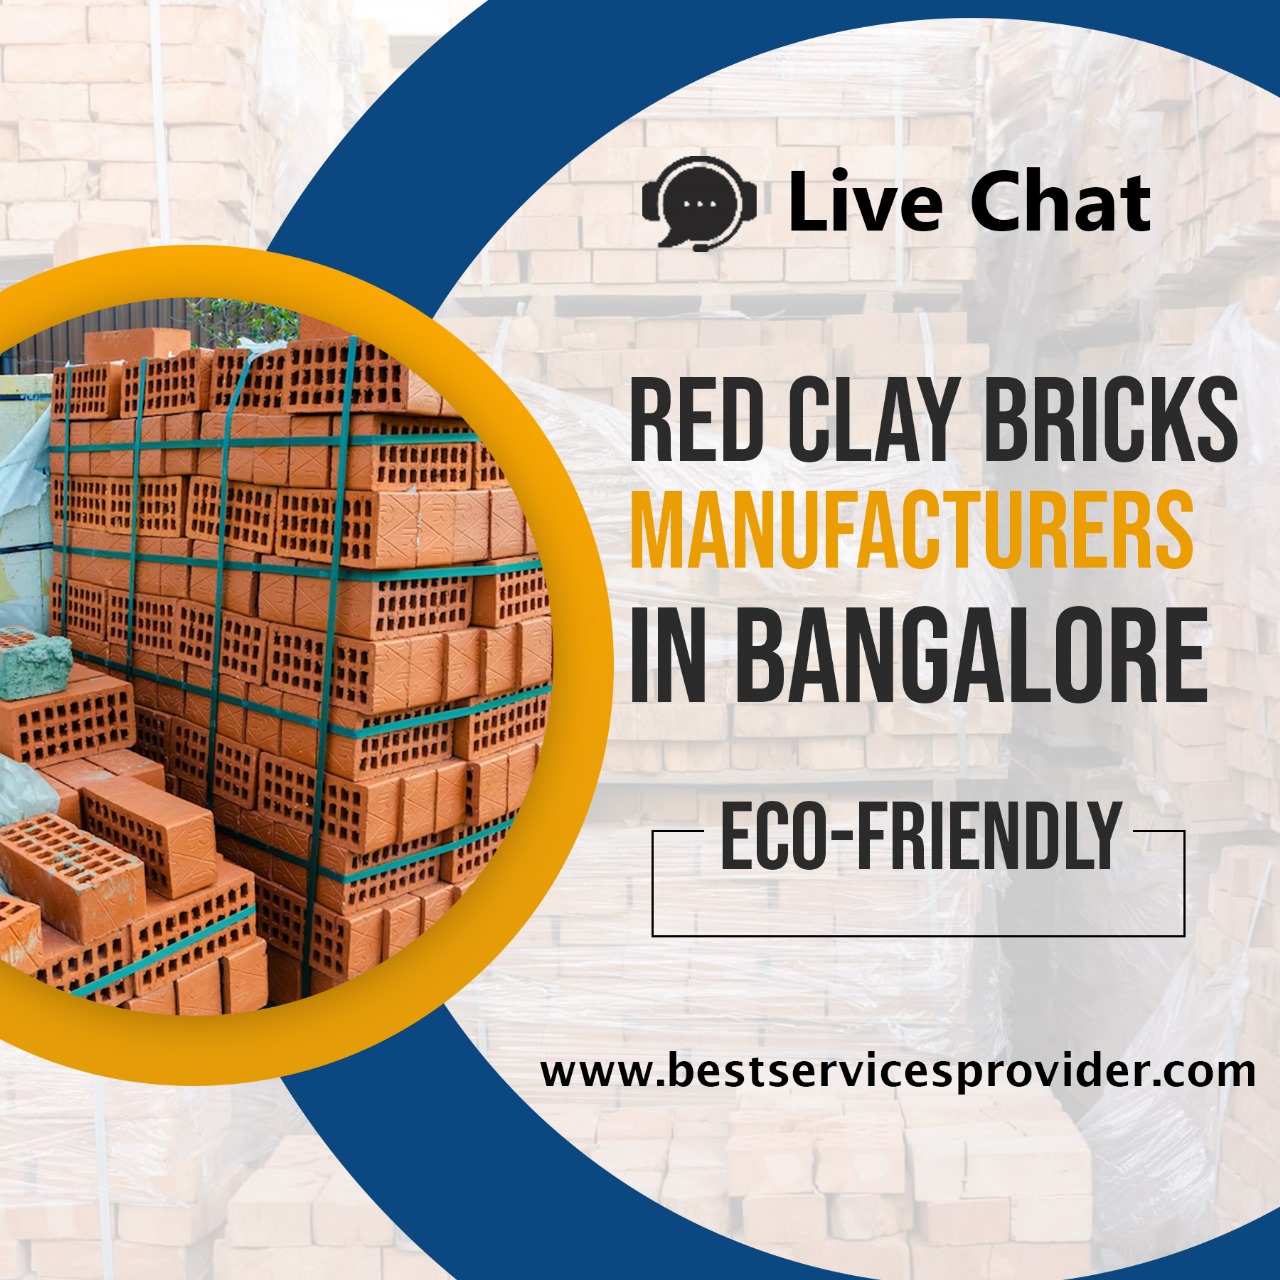 Red Clay Bricks Manufacturers In Bangalore